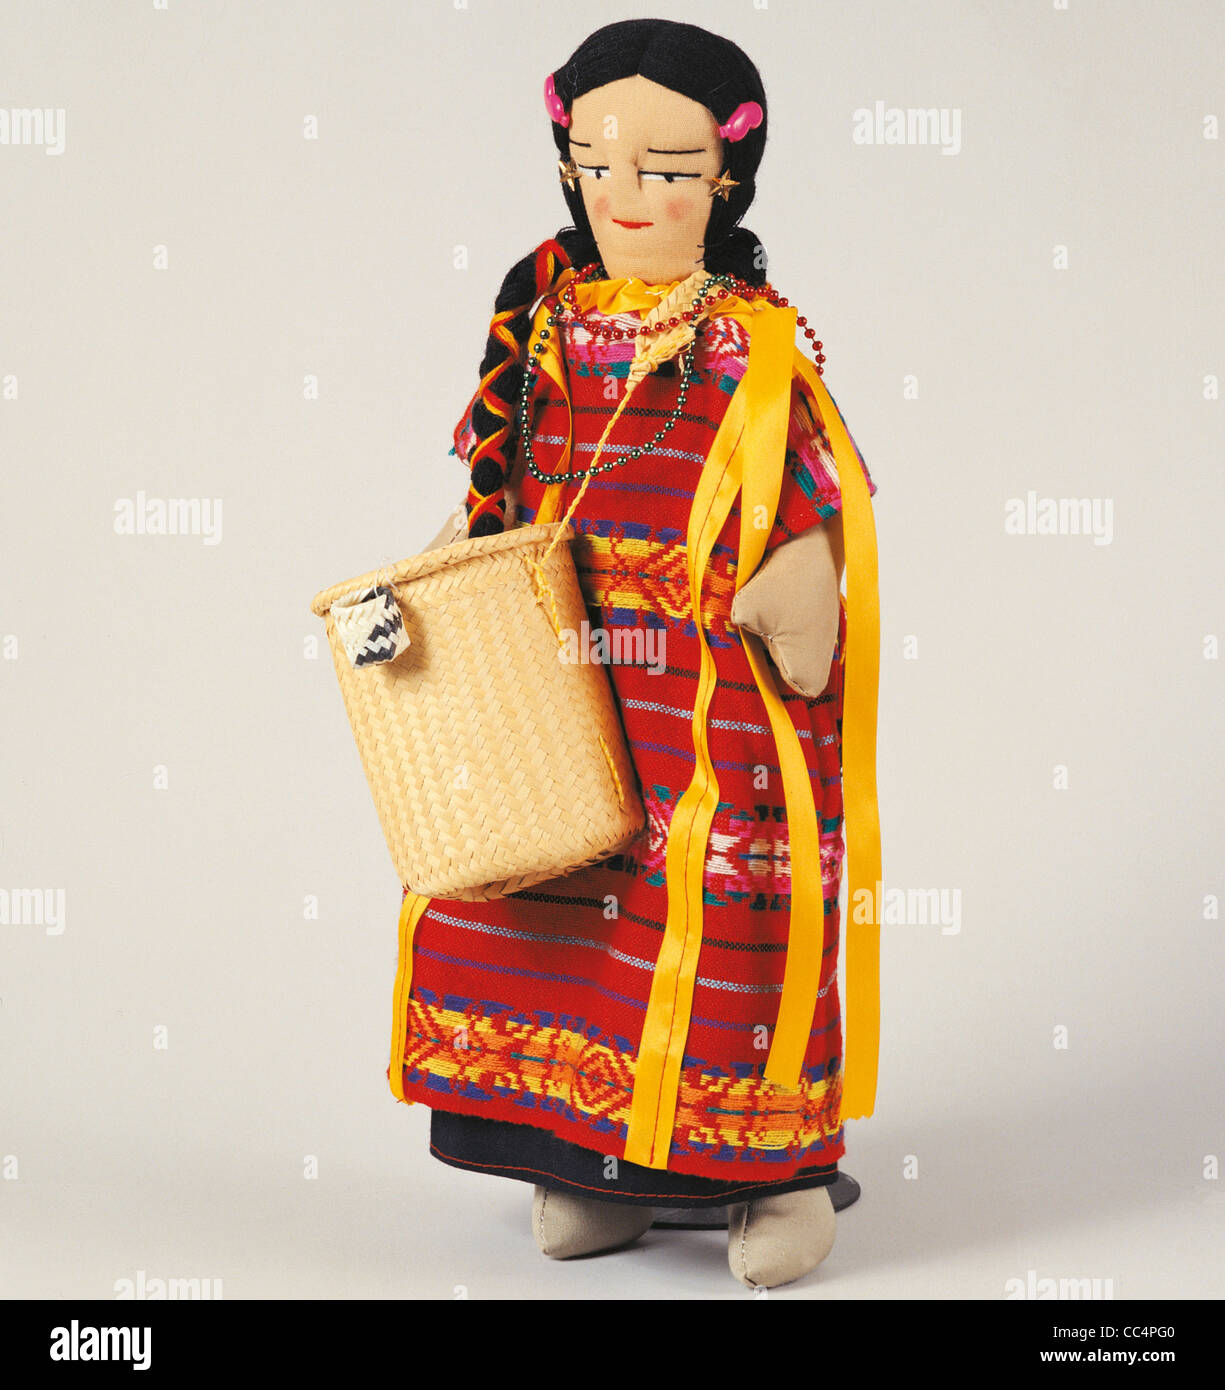 Collecting Toys Twentieth Century.Mexican Doll Big. Southern Mexico, Oaxaca. Ethnicity Triqui. Height Cm.46 Stock Photo